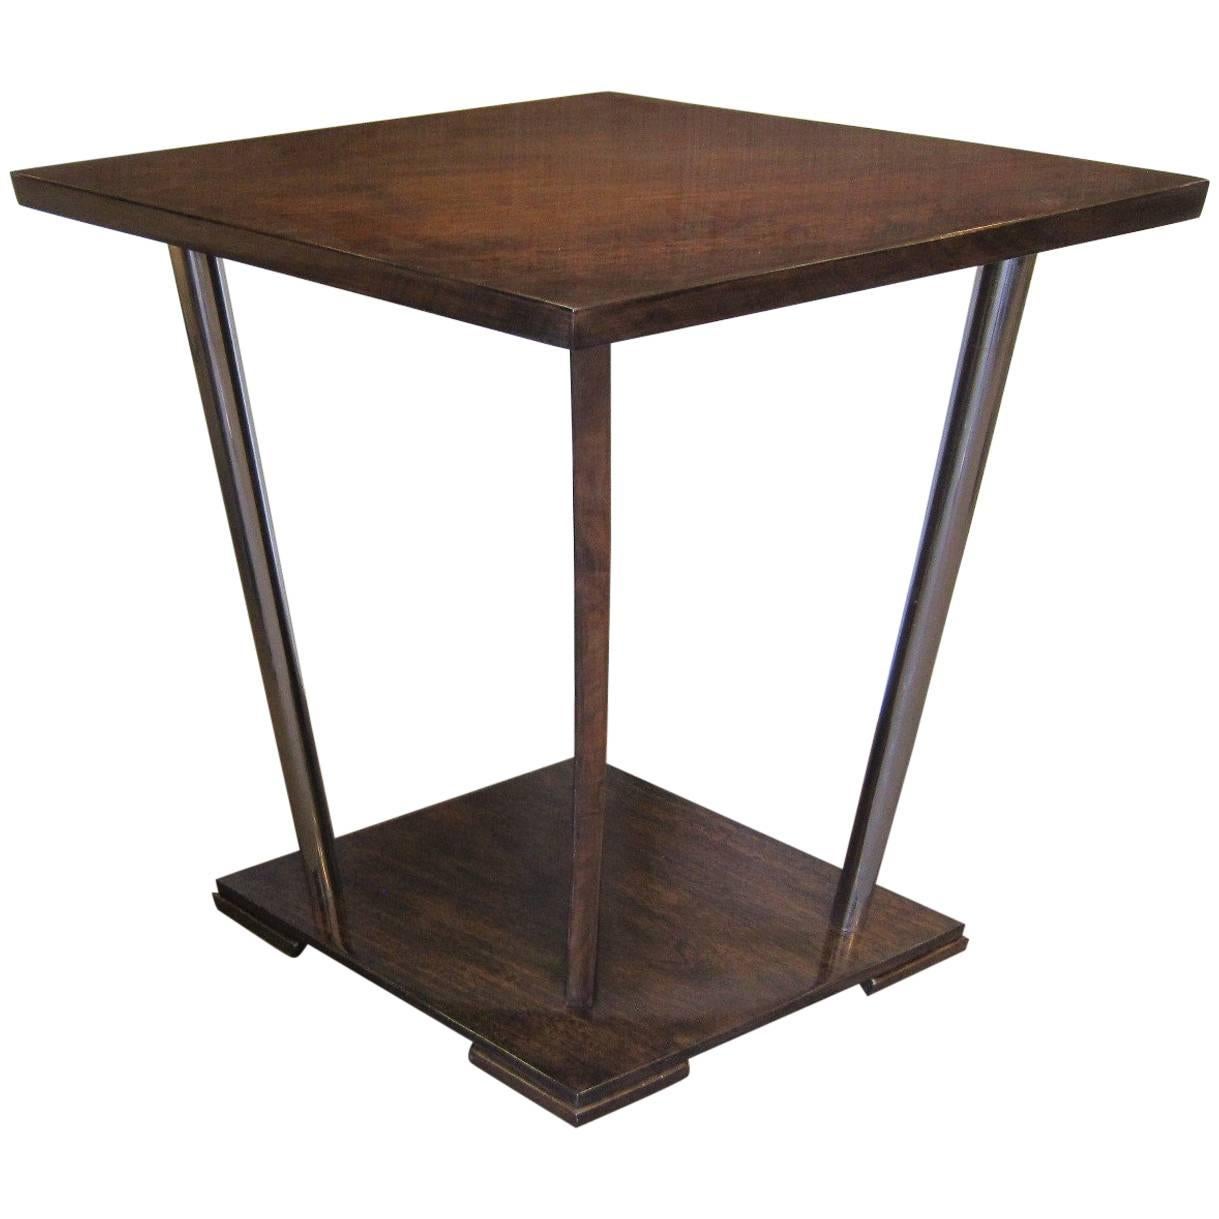 French Art Deco Unusual Diamond Shaped Walnut Side Table with Nickel Supports